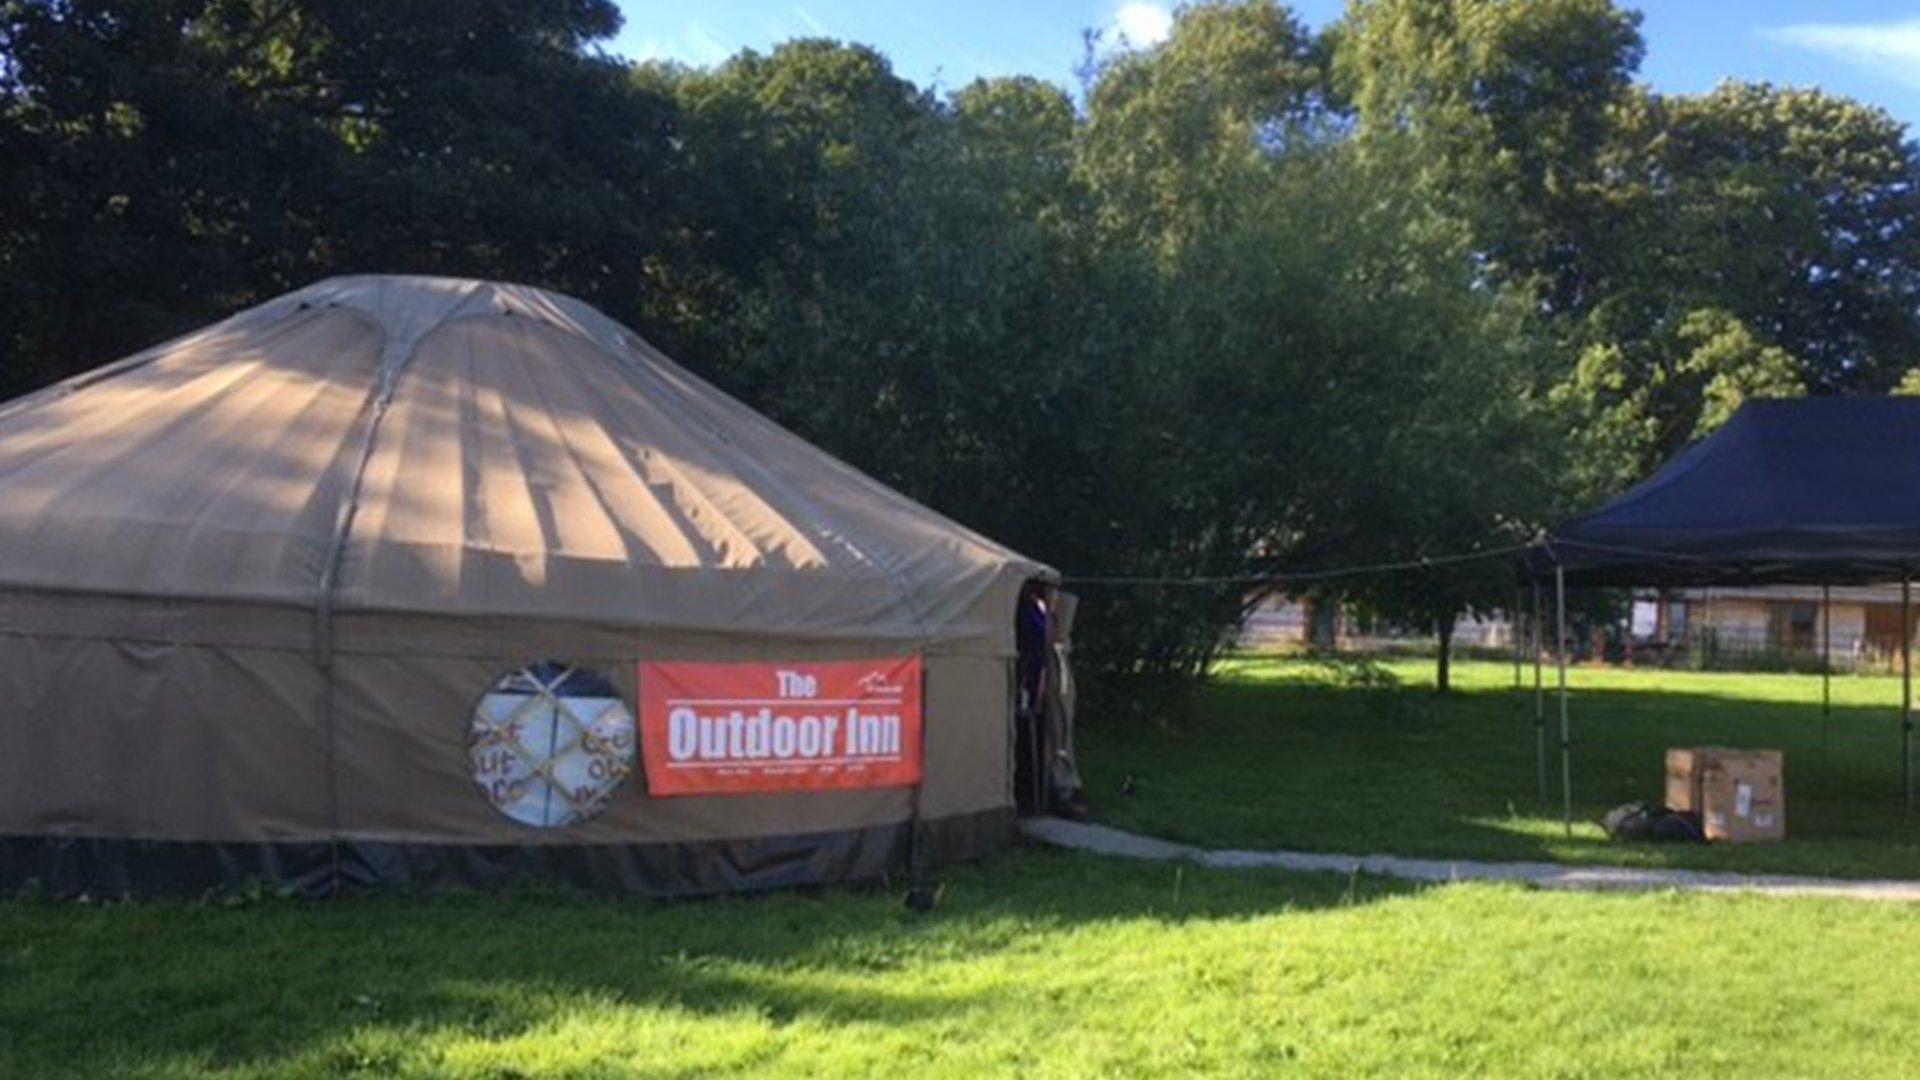 The OutdoorInn pop-up pub at OutdoorLads 15th Birthday camp